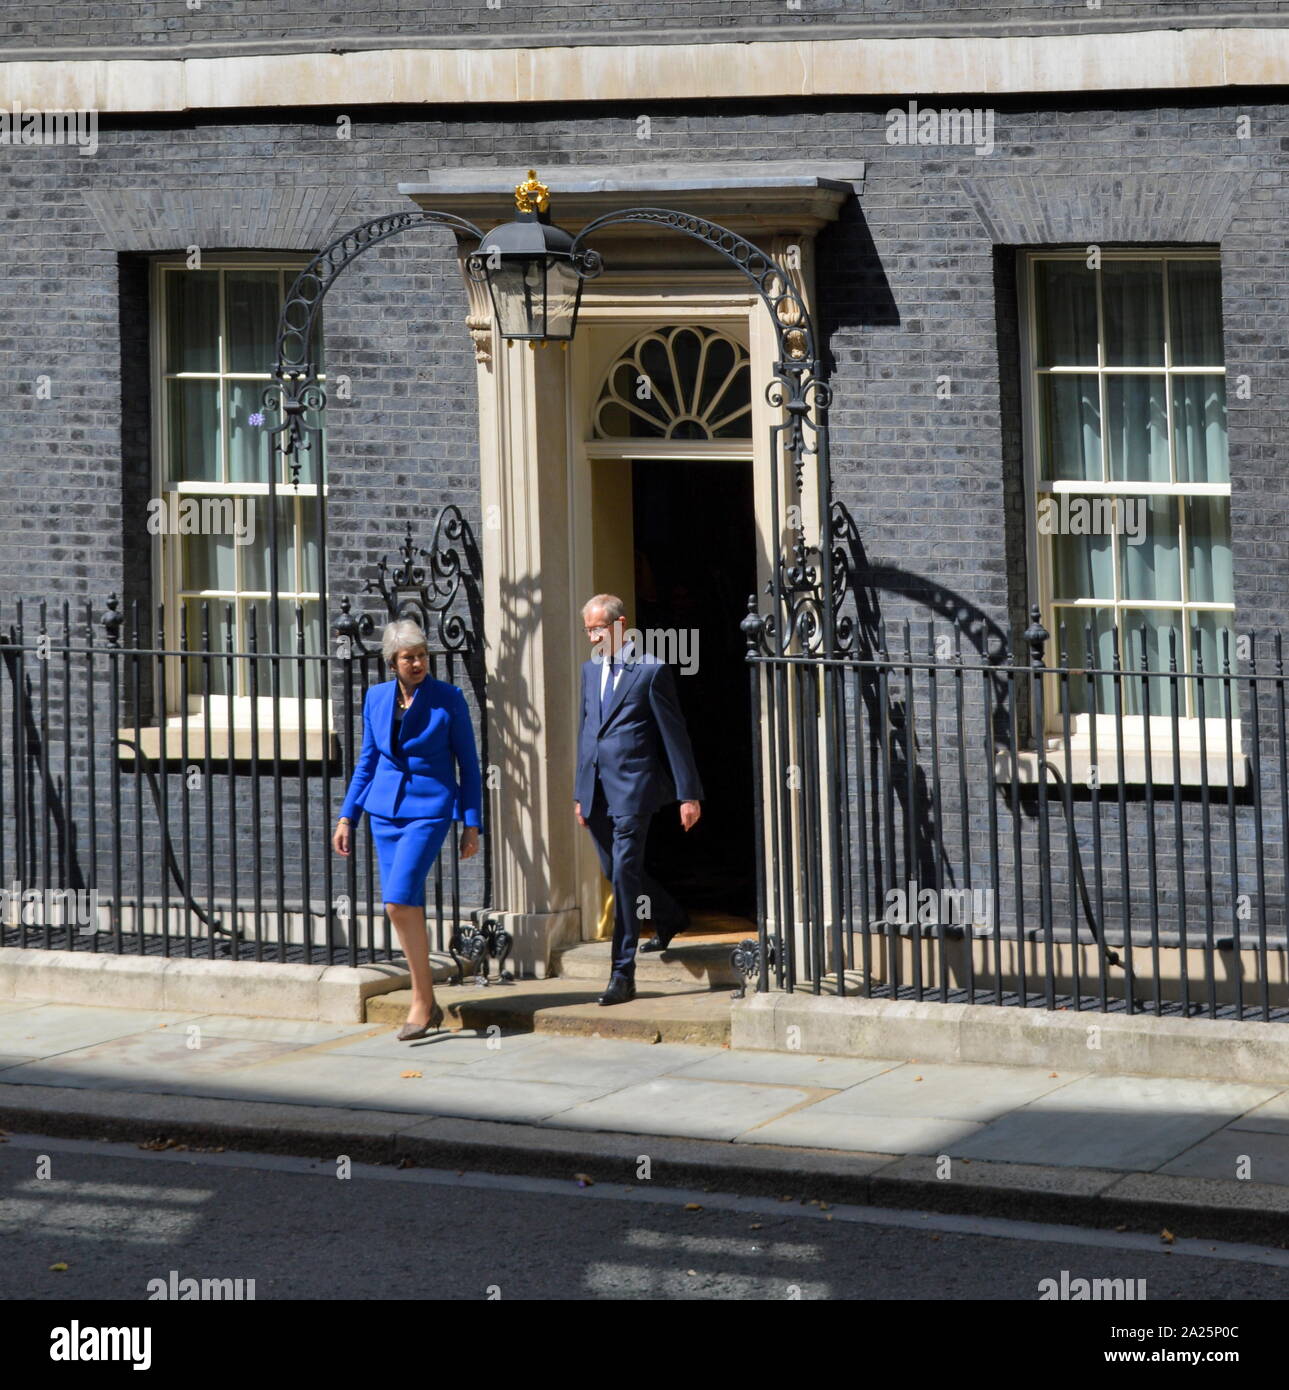 Theresa may leaves 10 downing street to make her resignation speech, london, before seeing queen elizabeth to formalise her departure. the last day of the premiership of theresa may, prime minister of the united kingdom, 13 july 2016 - 24 july 2019. may was leader of the conservative party from july 2016 - 23 july 2019. shown with her husband phillip may. Stock Photo